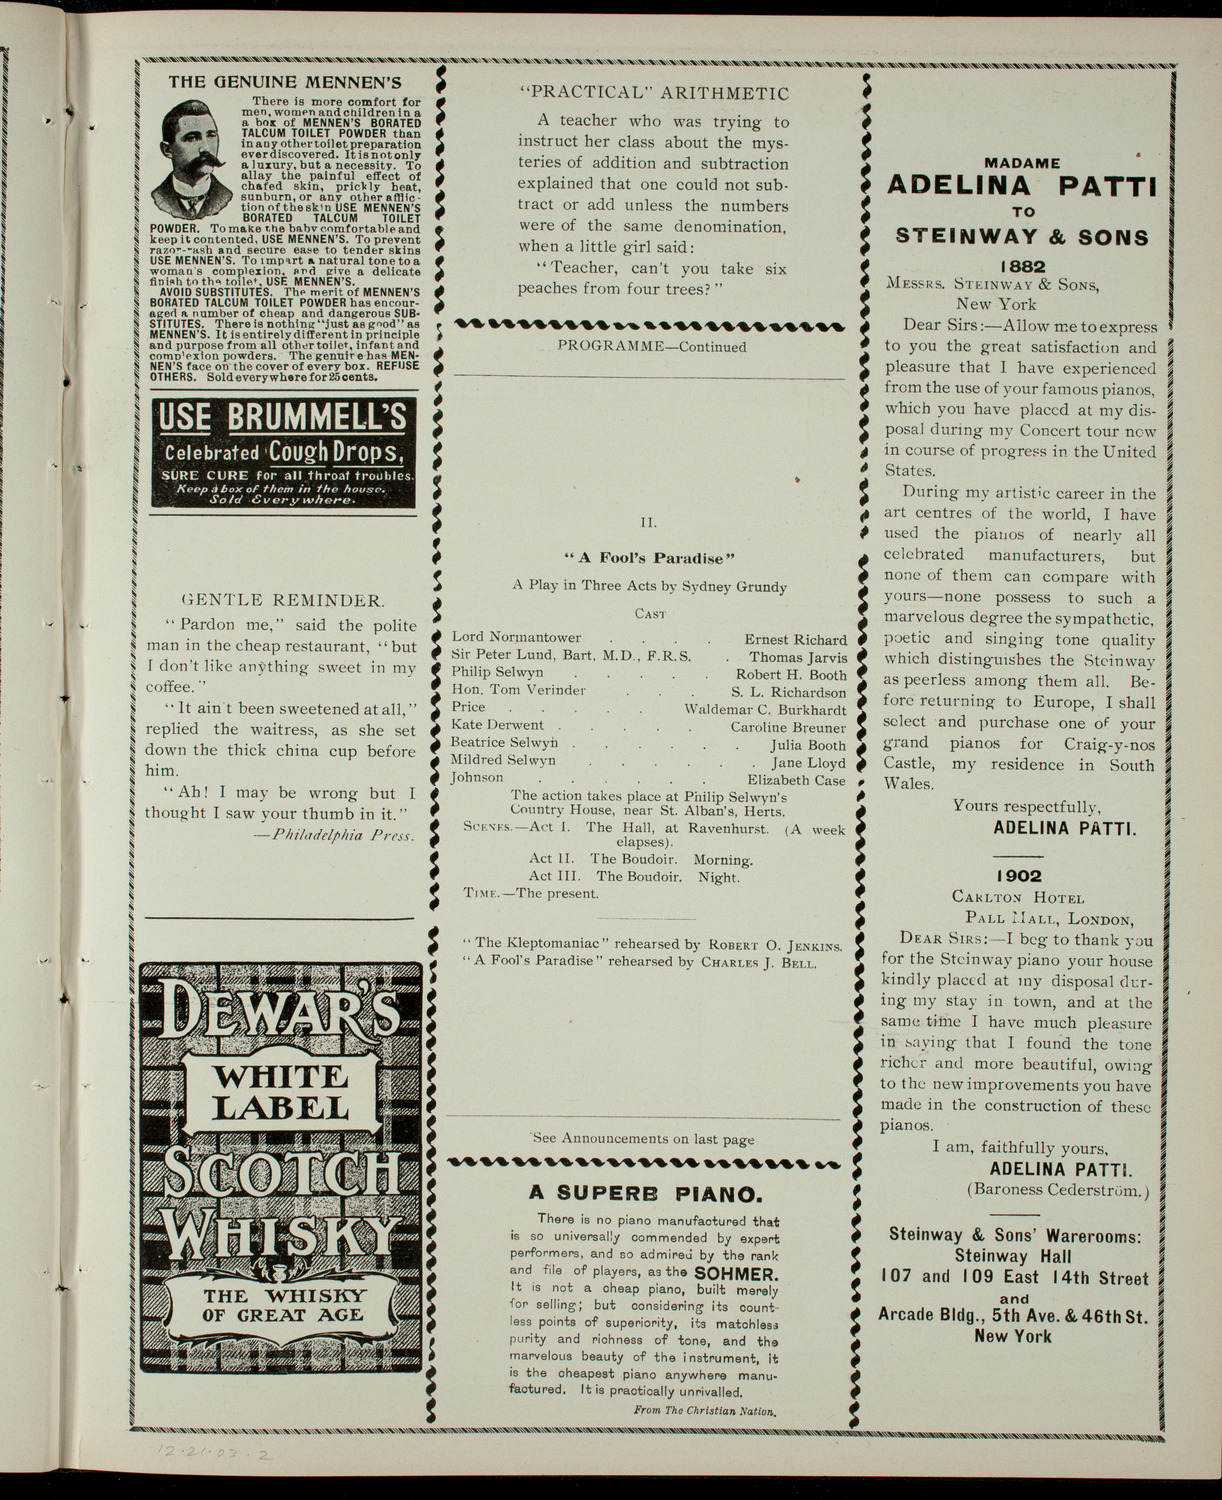 Academy Stock Company of the American Academy of Dramatic Arts/ Empire Theatre Dramatic School, December 21, 1903, program page 3